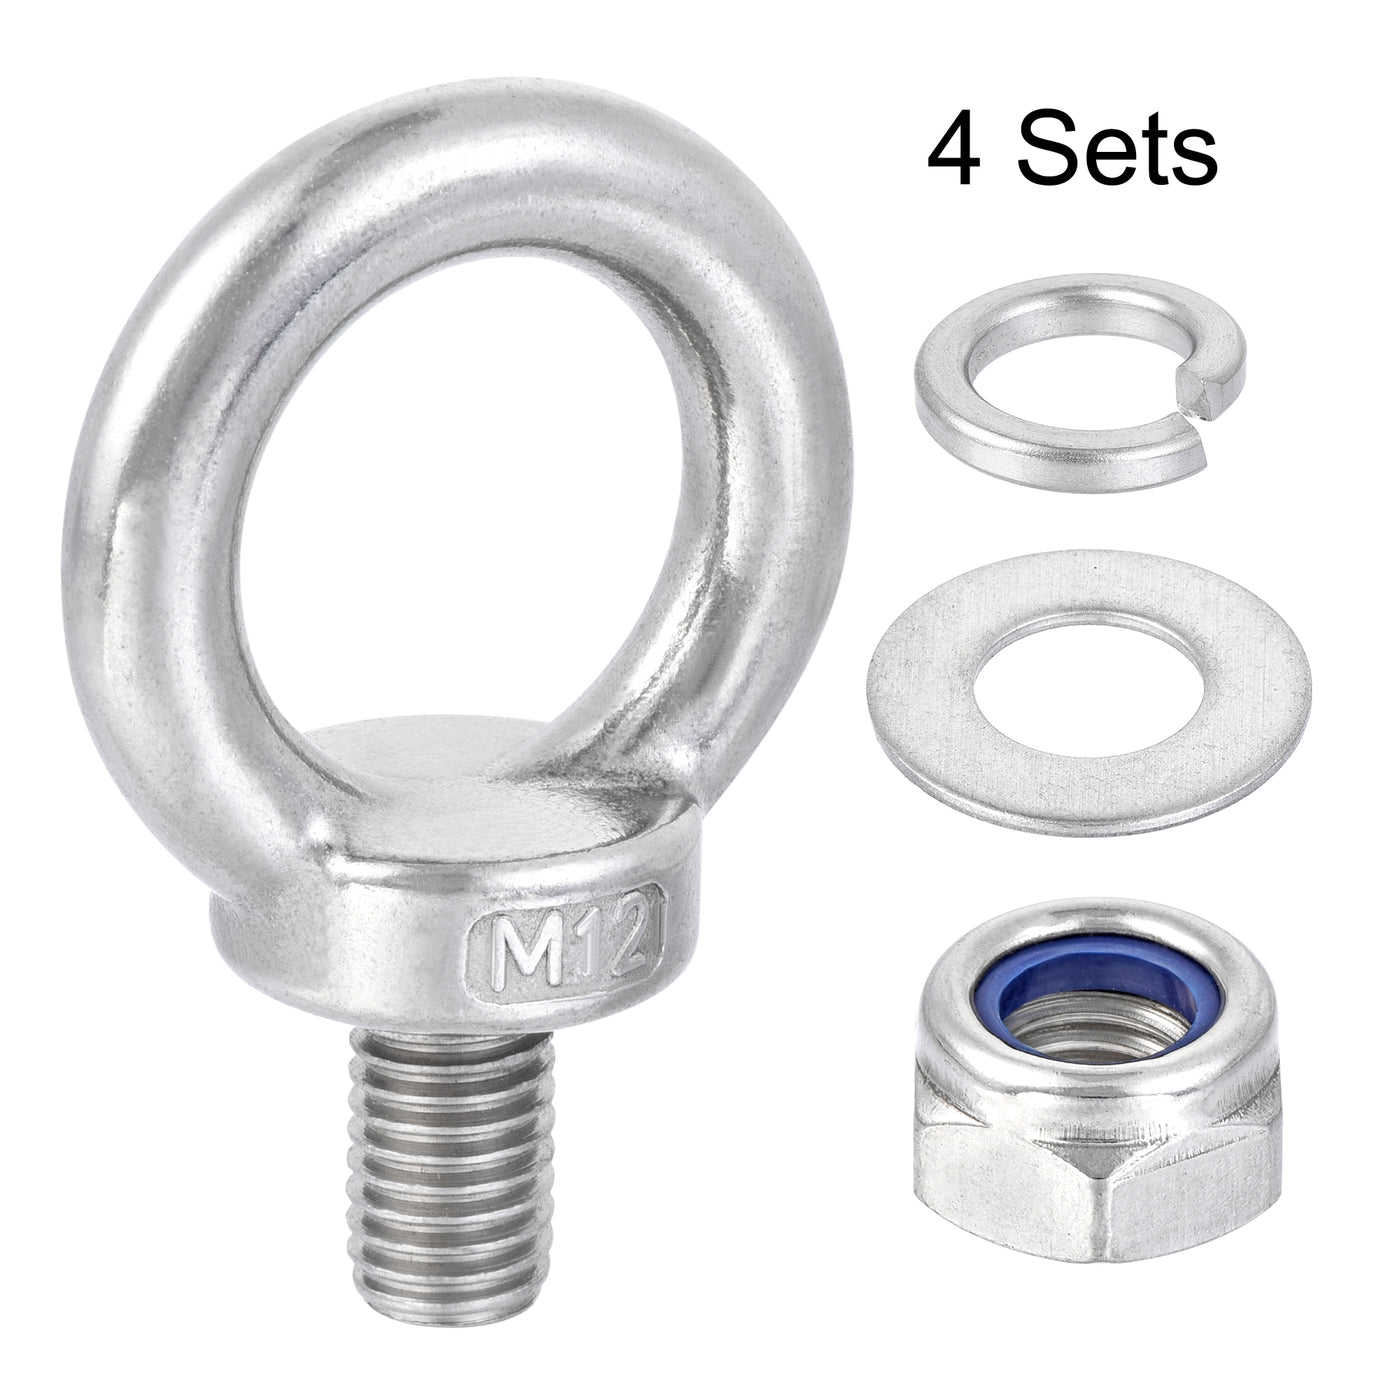 uxcell Uxcell Lifting Eye Bolt M12 x 20mm Male Thread with Hex Screw Nut Gasket Flat Washer for Hanging, 304 Stainless Steel, 4 Sets